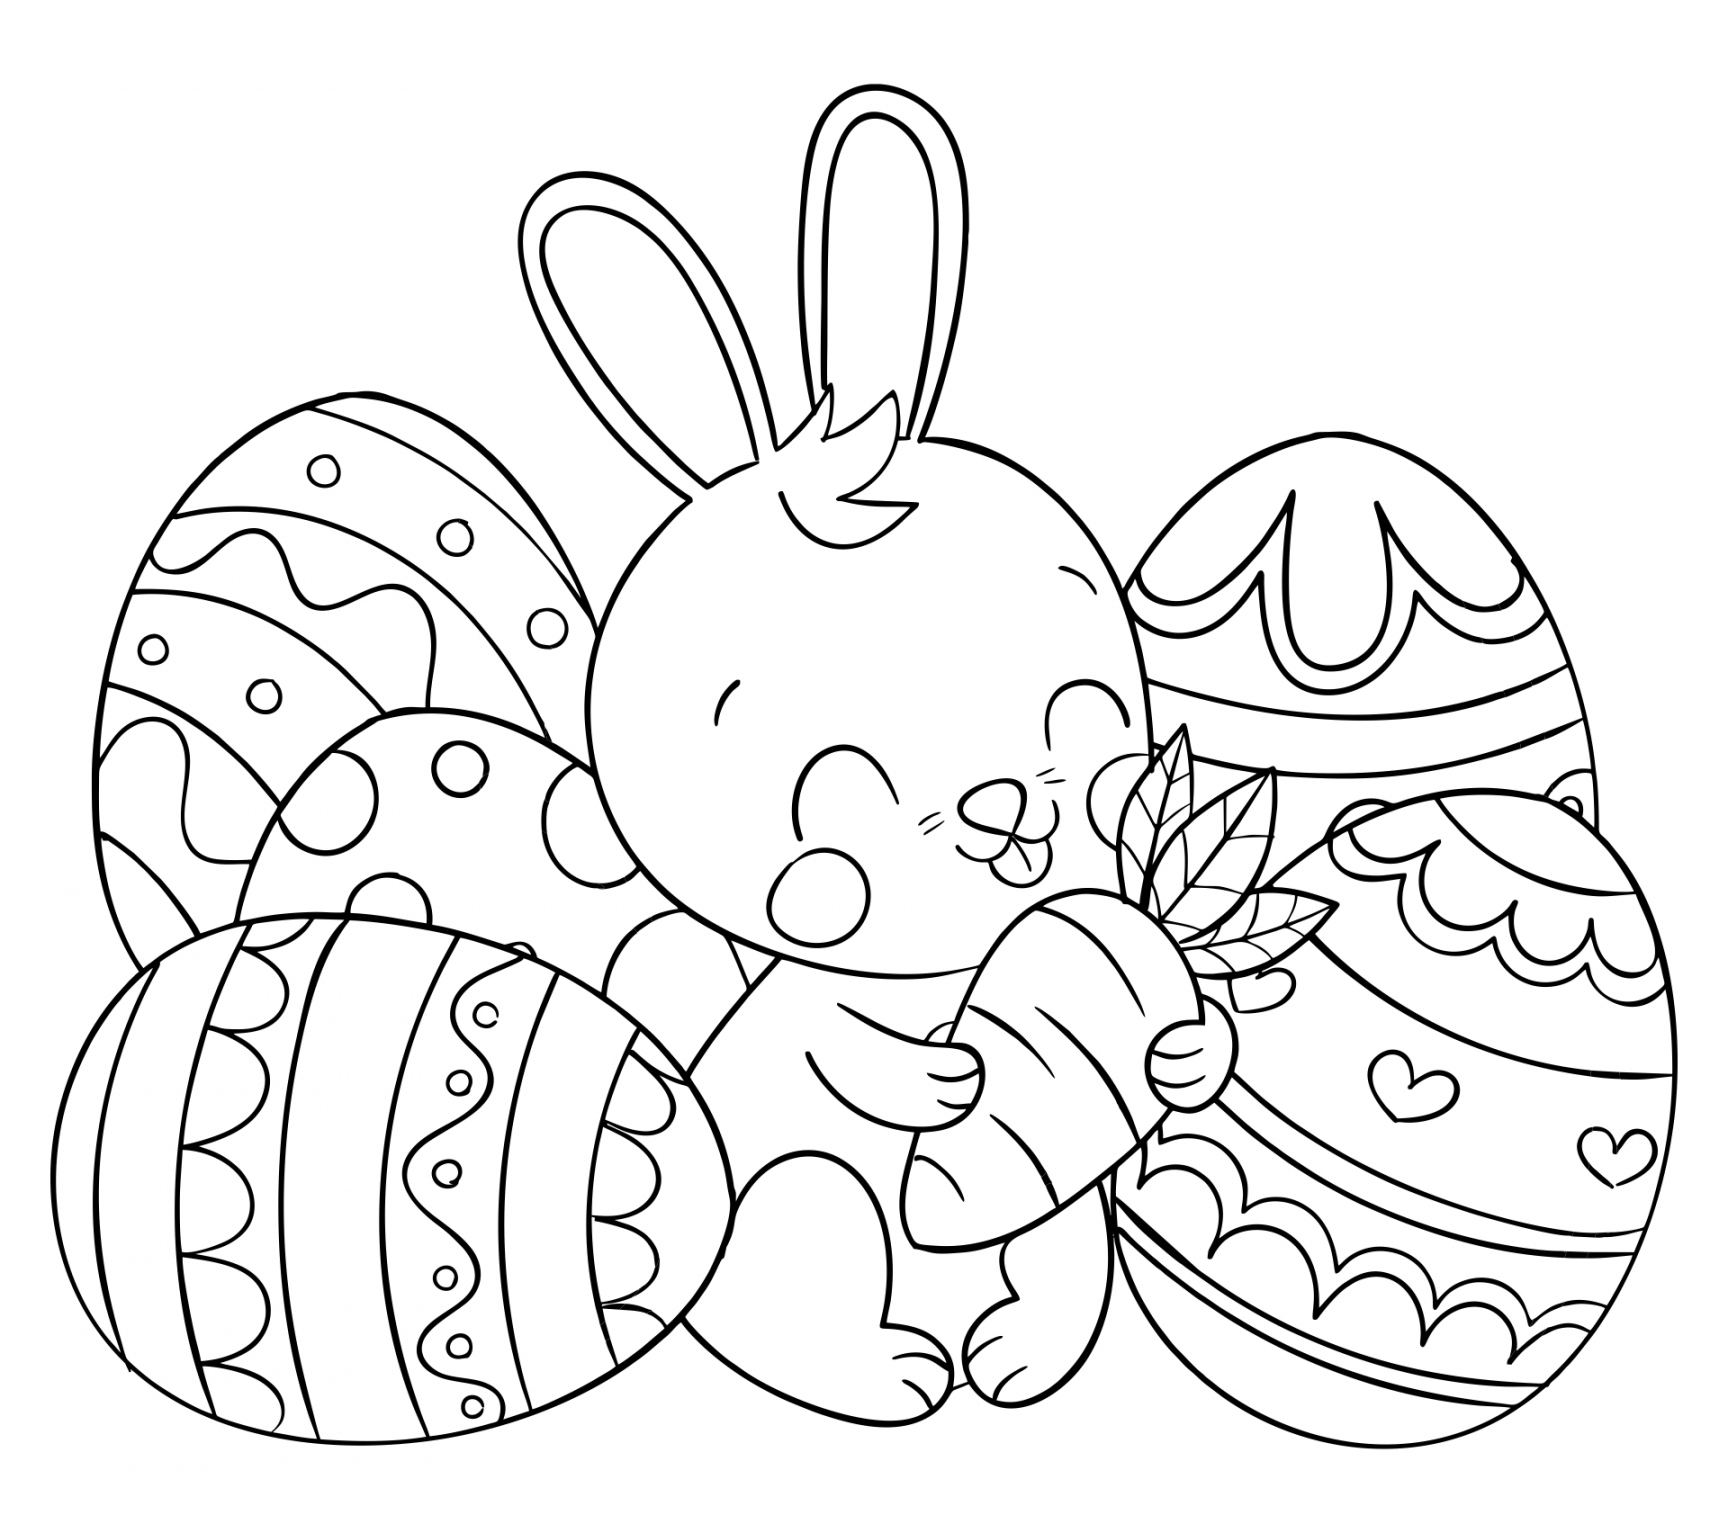 Free Printable Easter Color Pages - Printable -  Best Free Printable Easter Egg Coloring Page - printablee